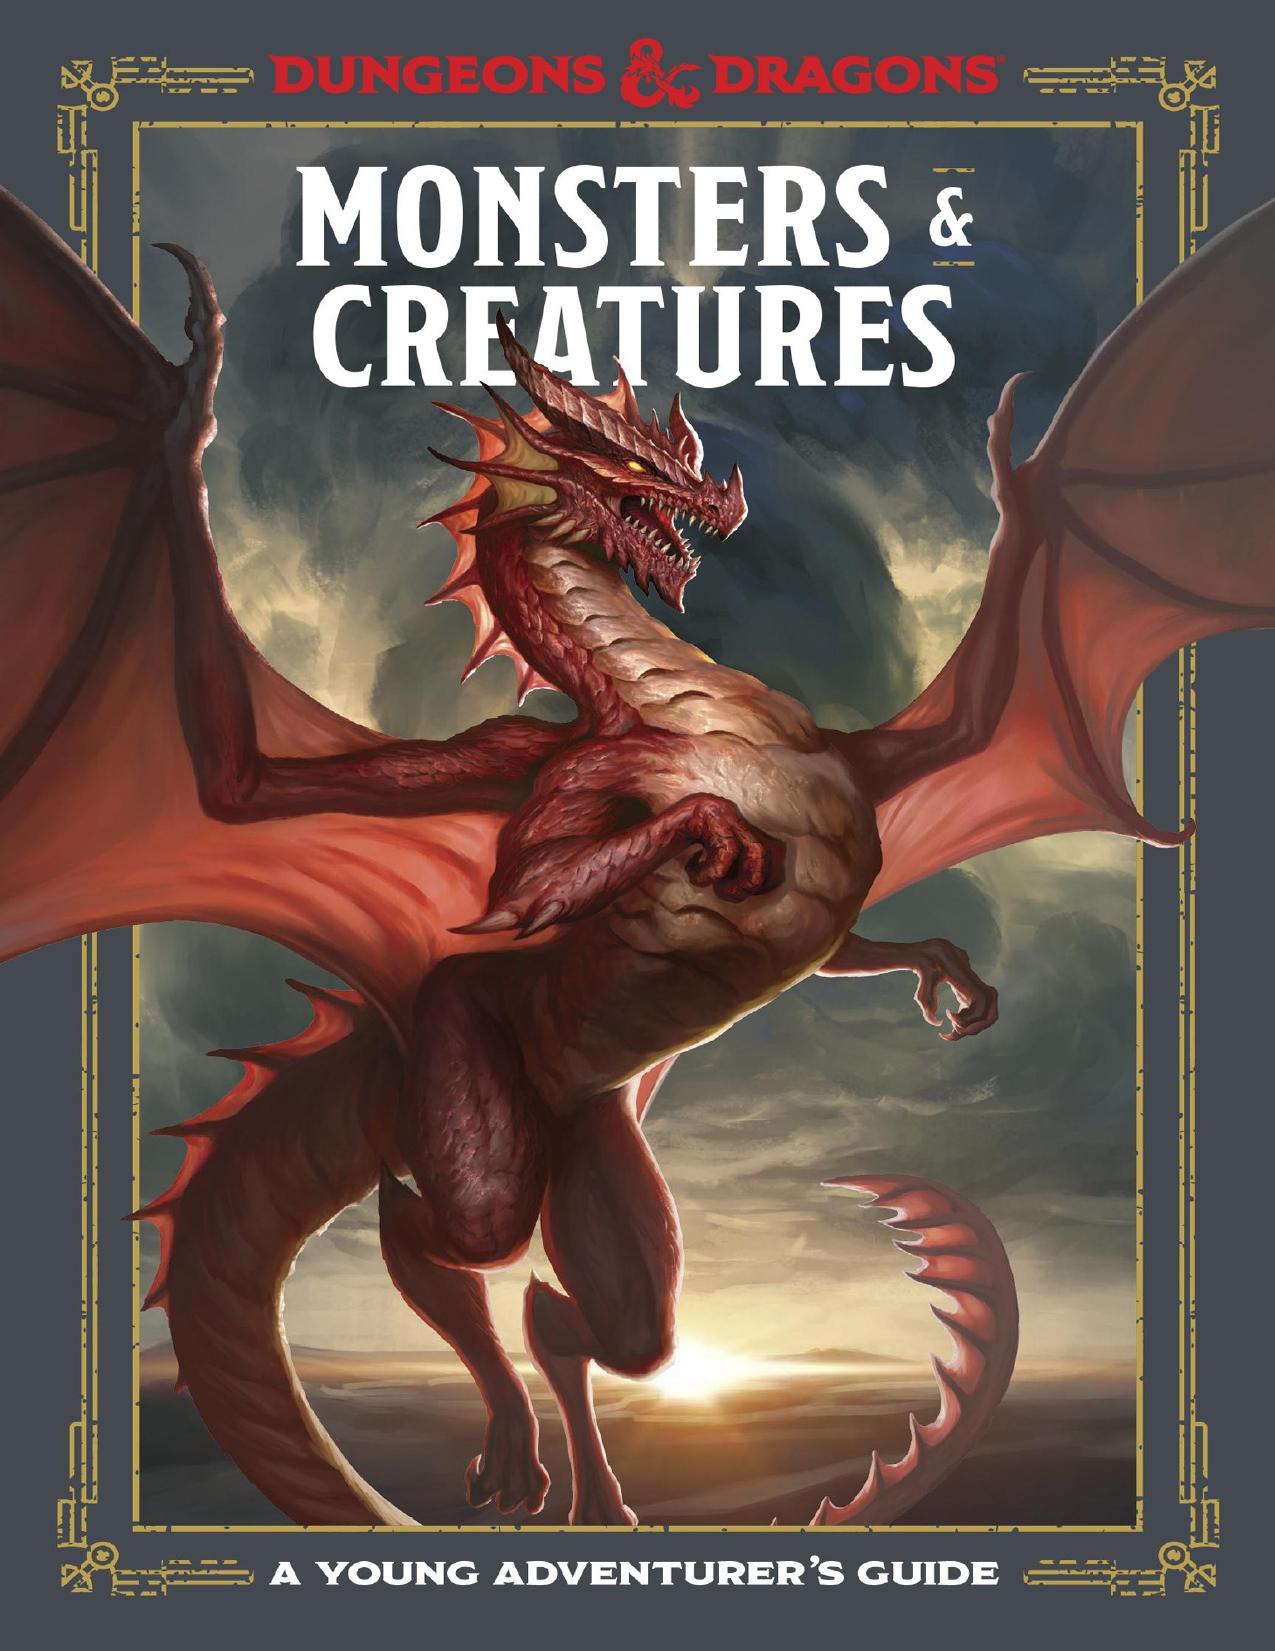 Monsters and Creatures